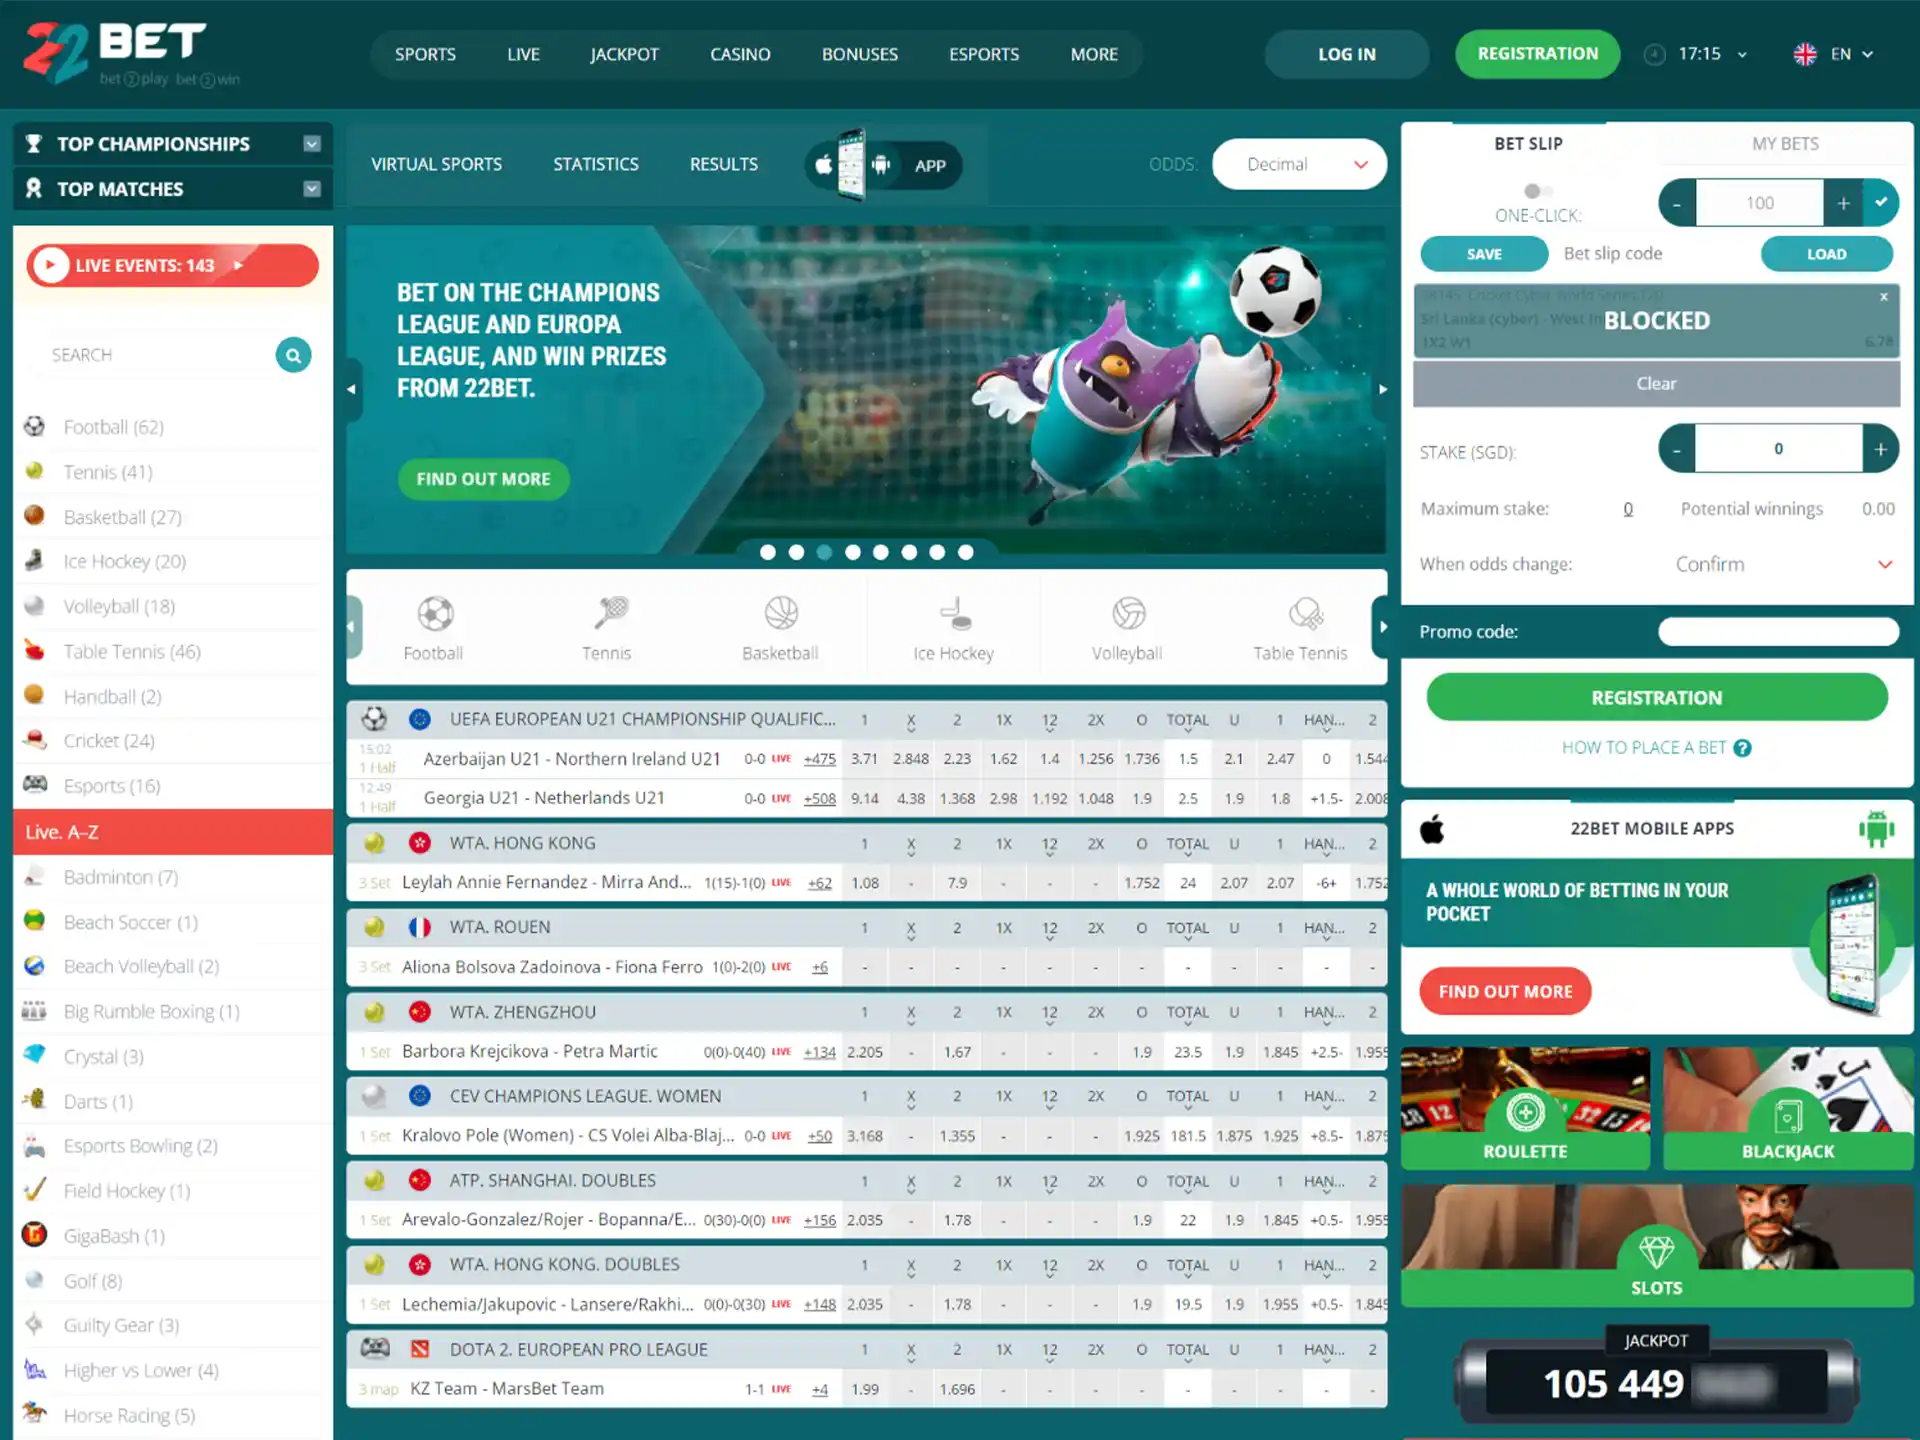 The 22Bet website is user-friendly and optimized for players.